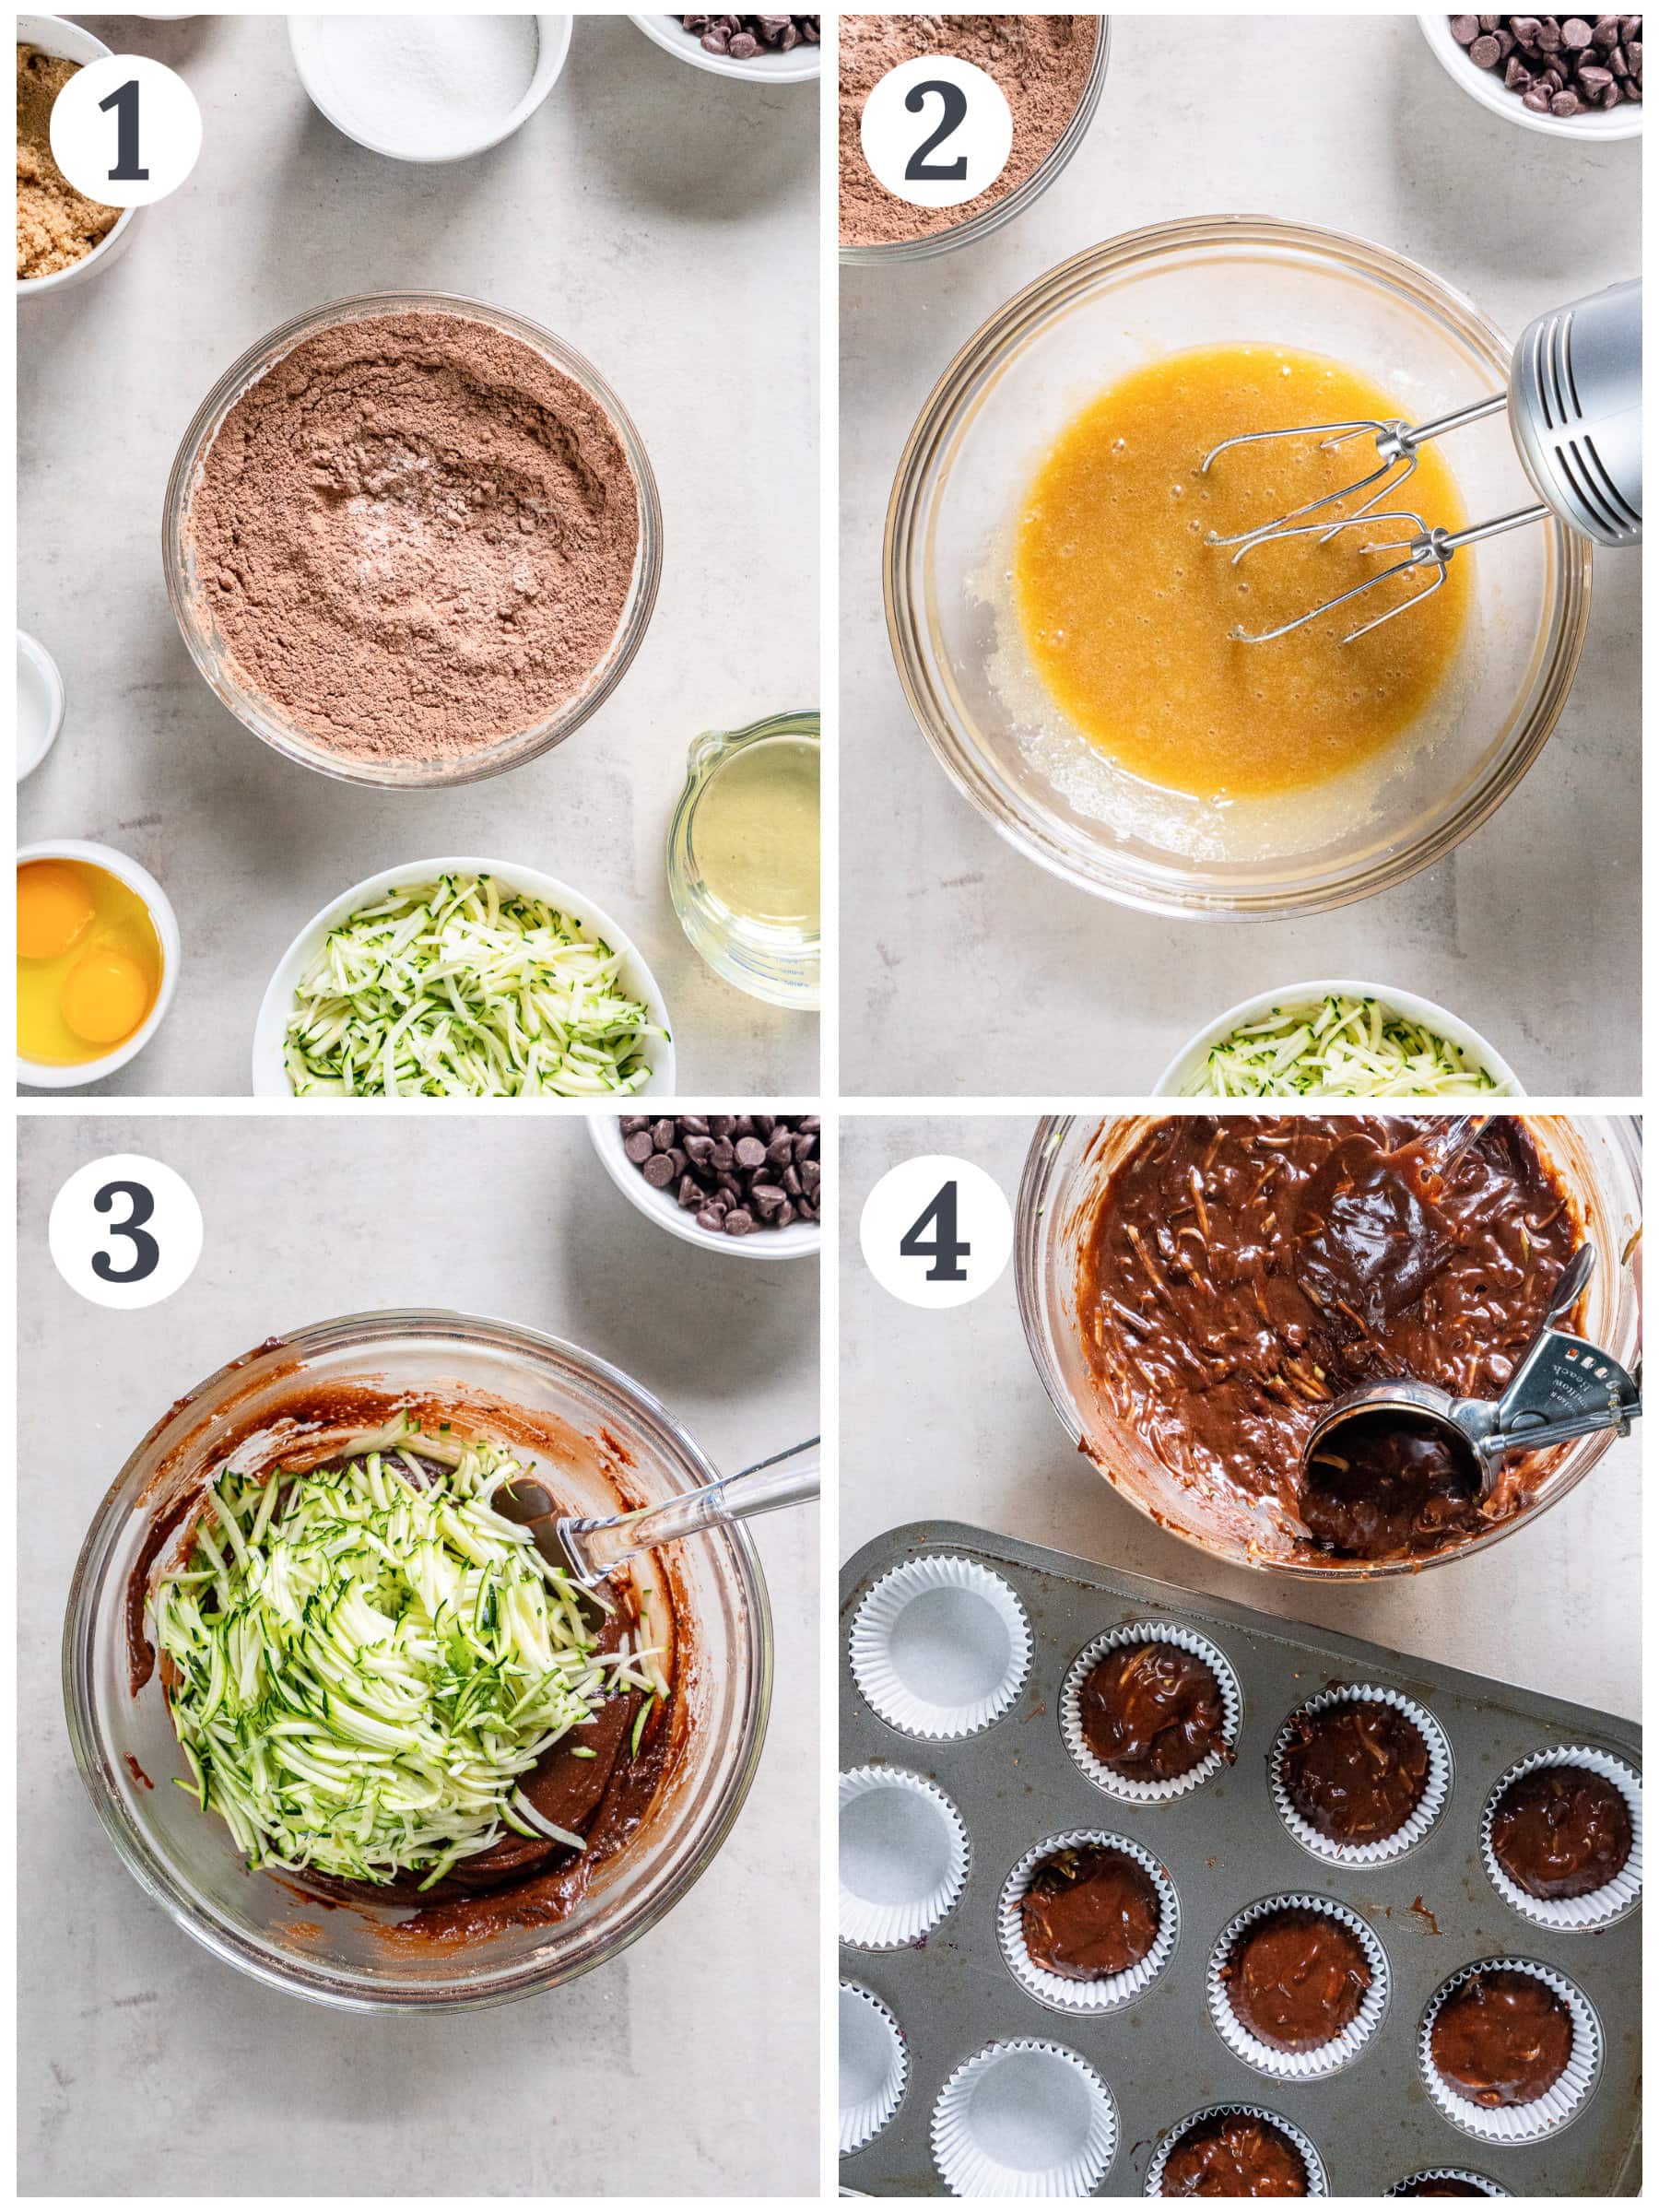 photo collage demonstrating how to make chocolate zucchini muffins in a mixing bowl and muffin tin.